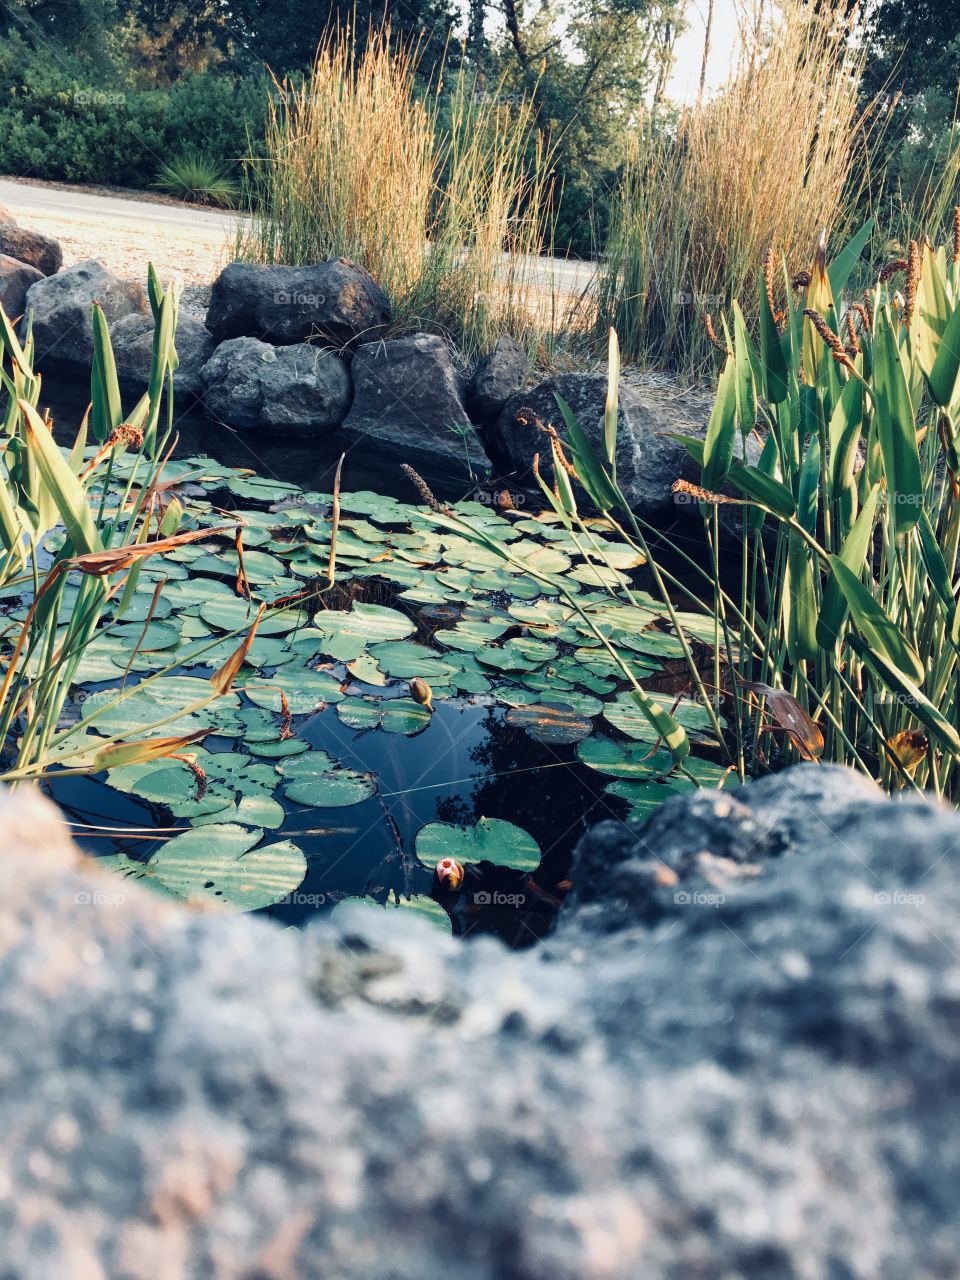 Gazing over a stone into a lily pad covered pond